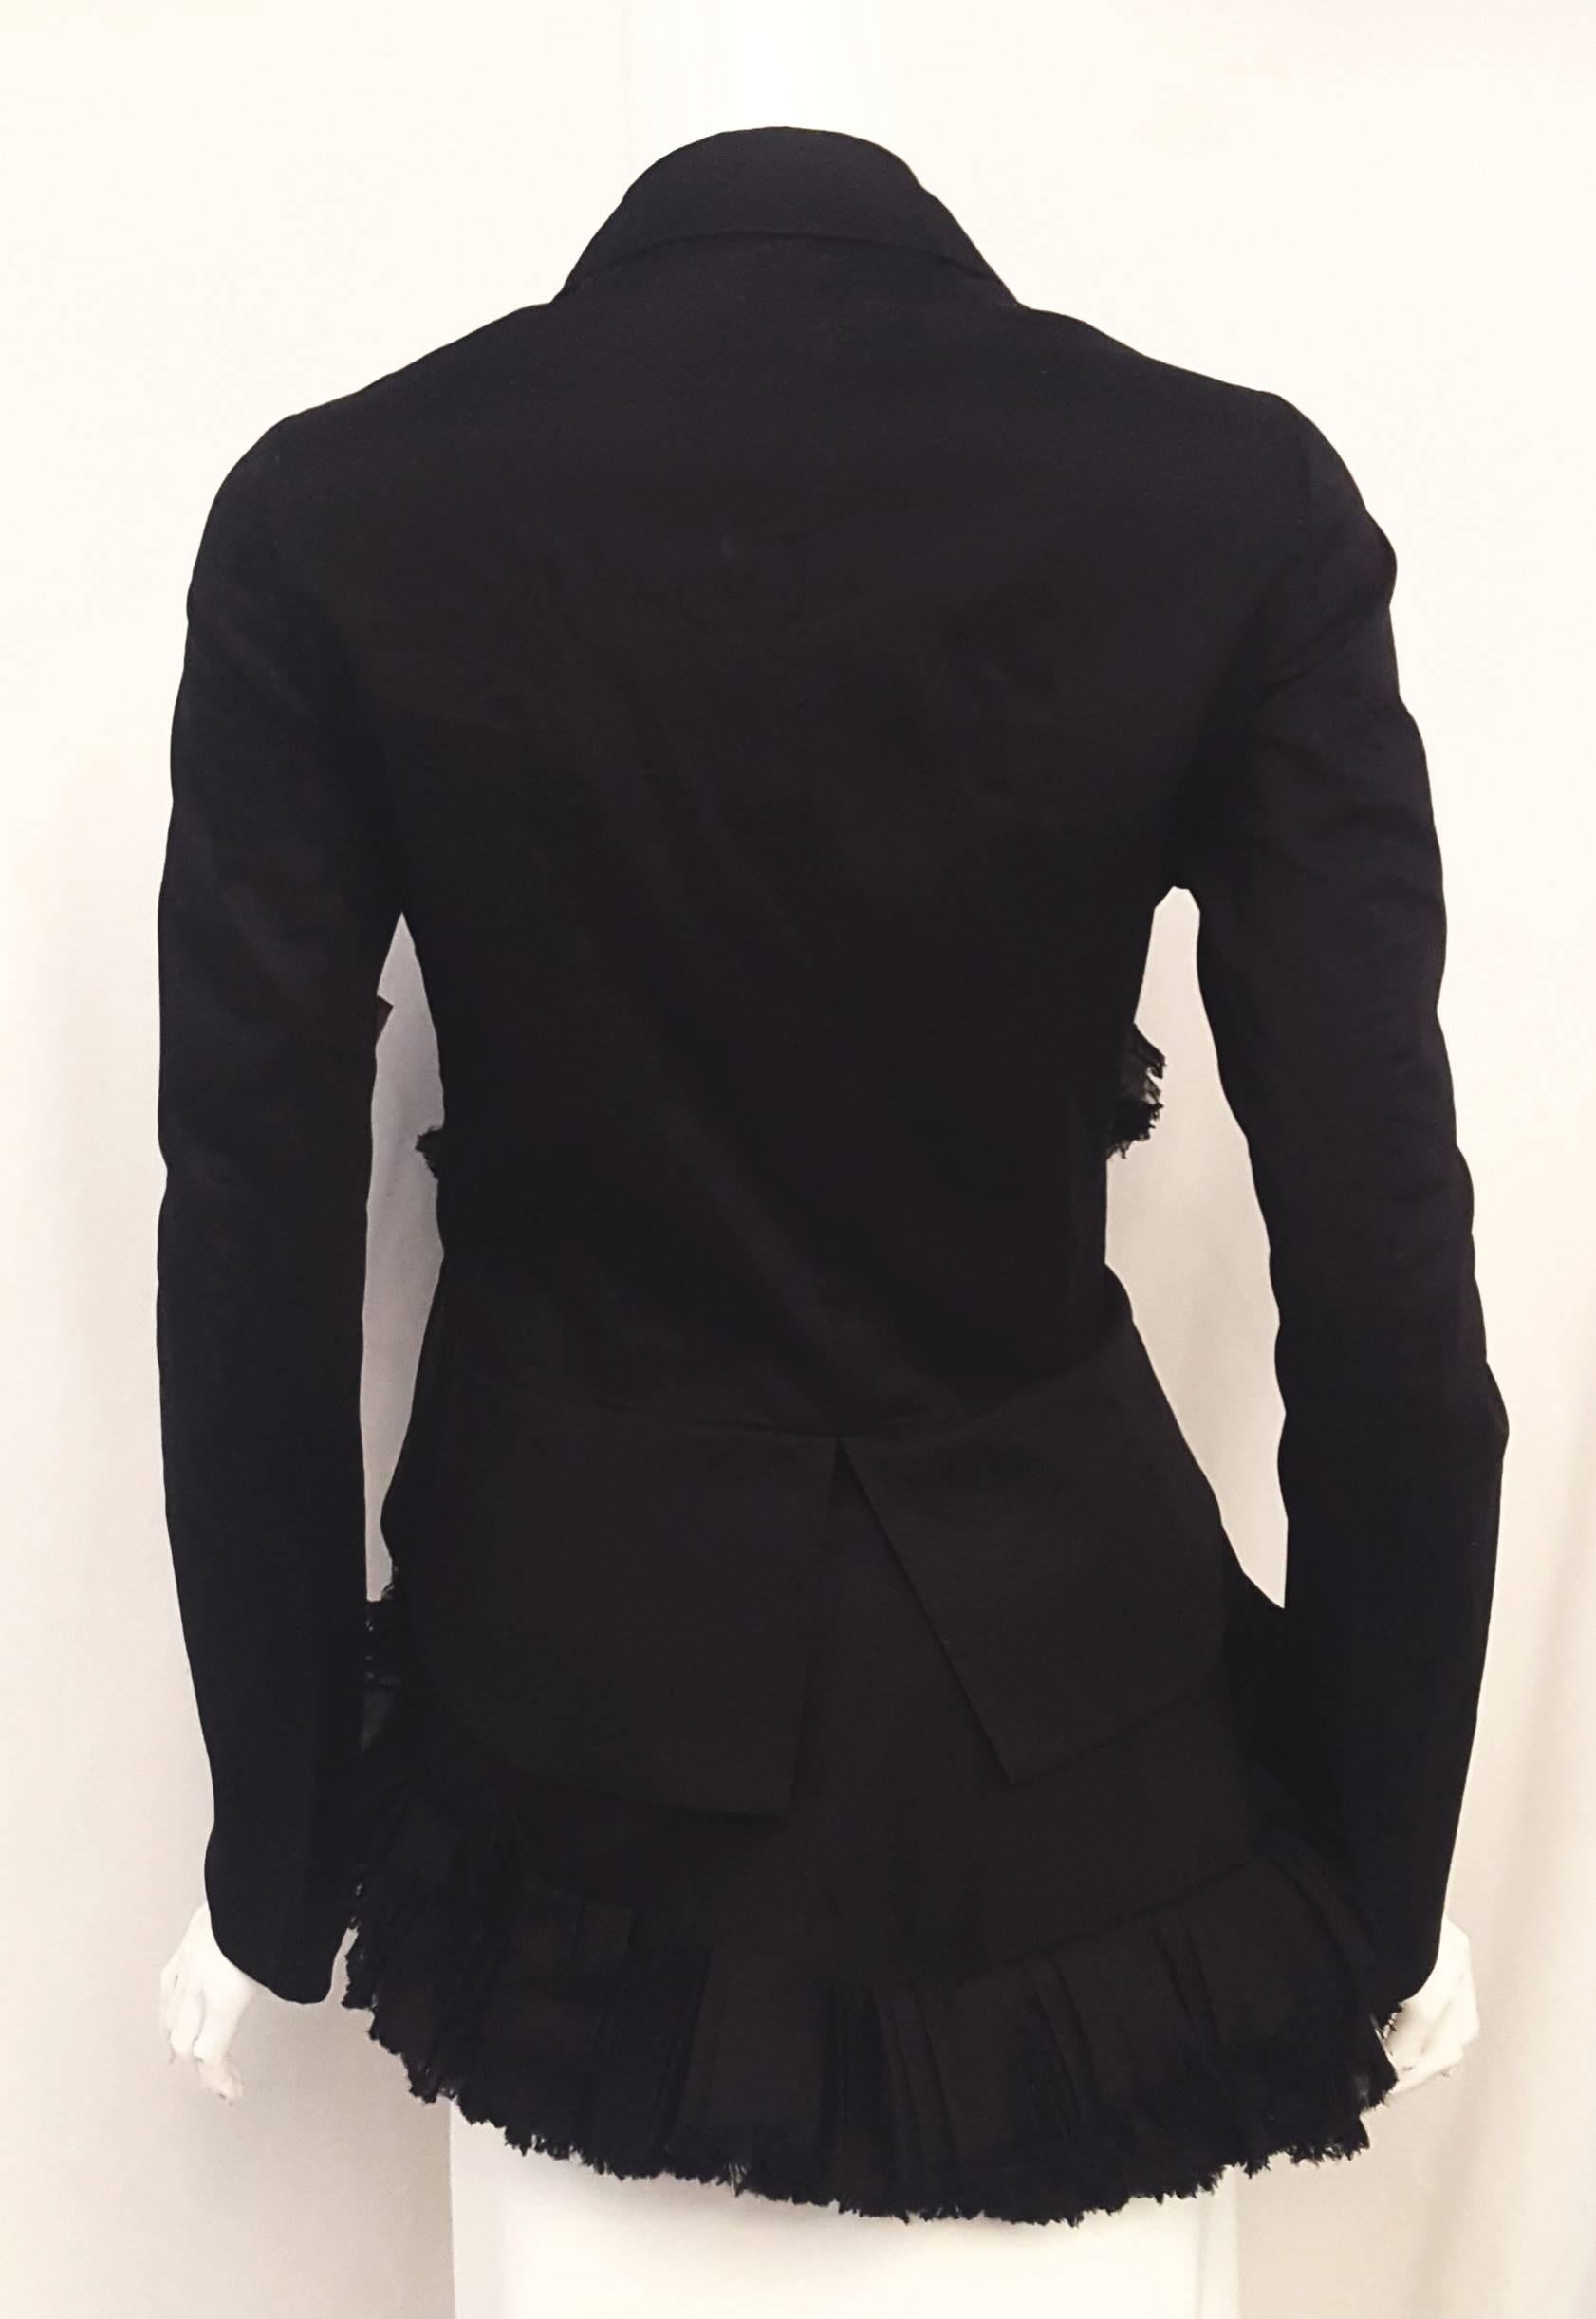 Marni Black Open Front Jacket Layered Pleated Ruffles w/Long Sleeves 40 EU In Excellent Condition For Sale In Palm Beach, FL